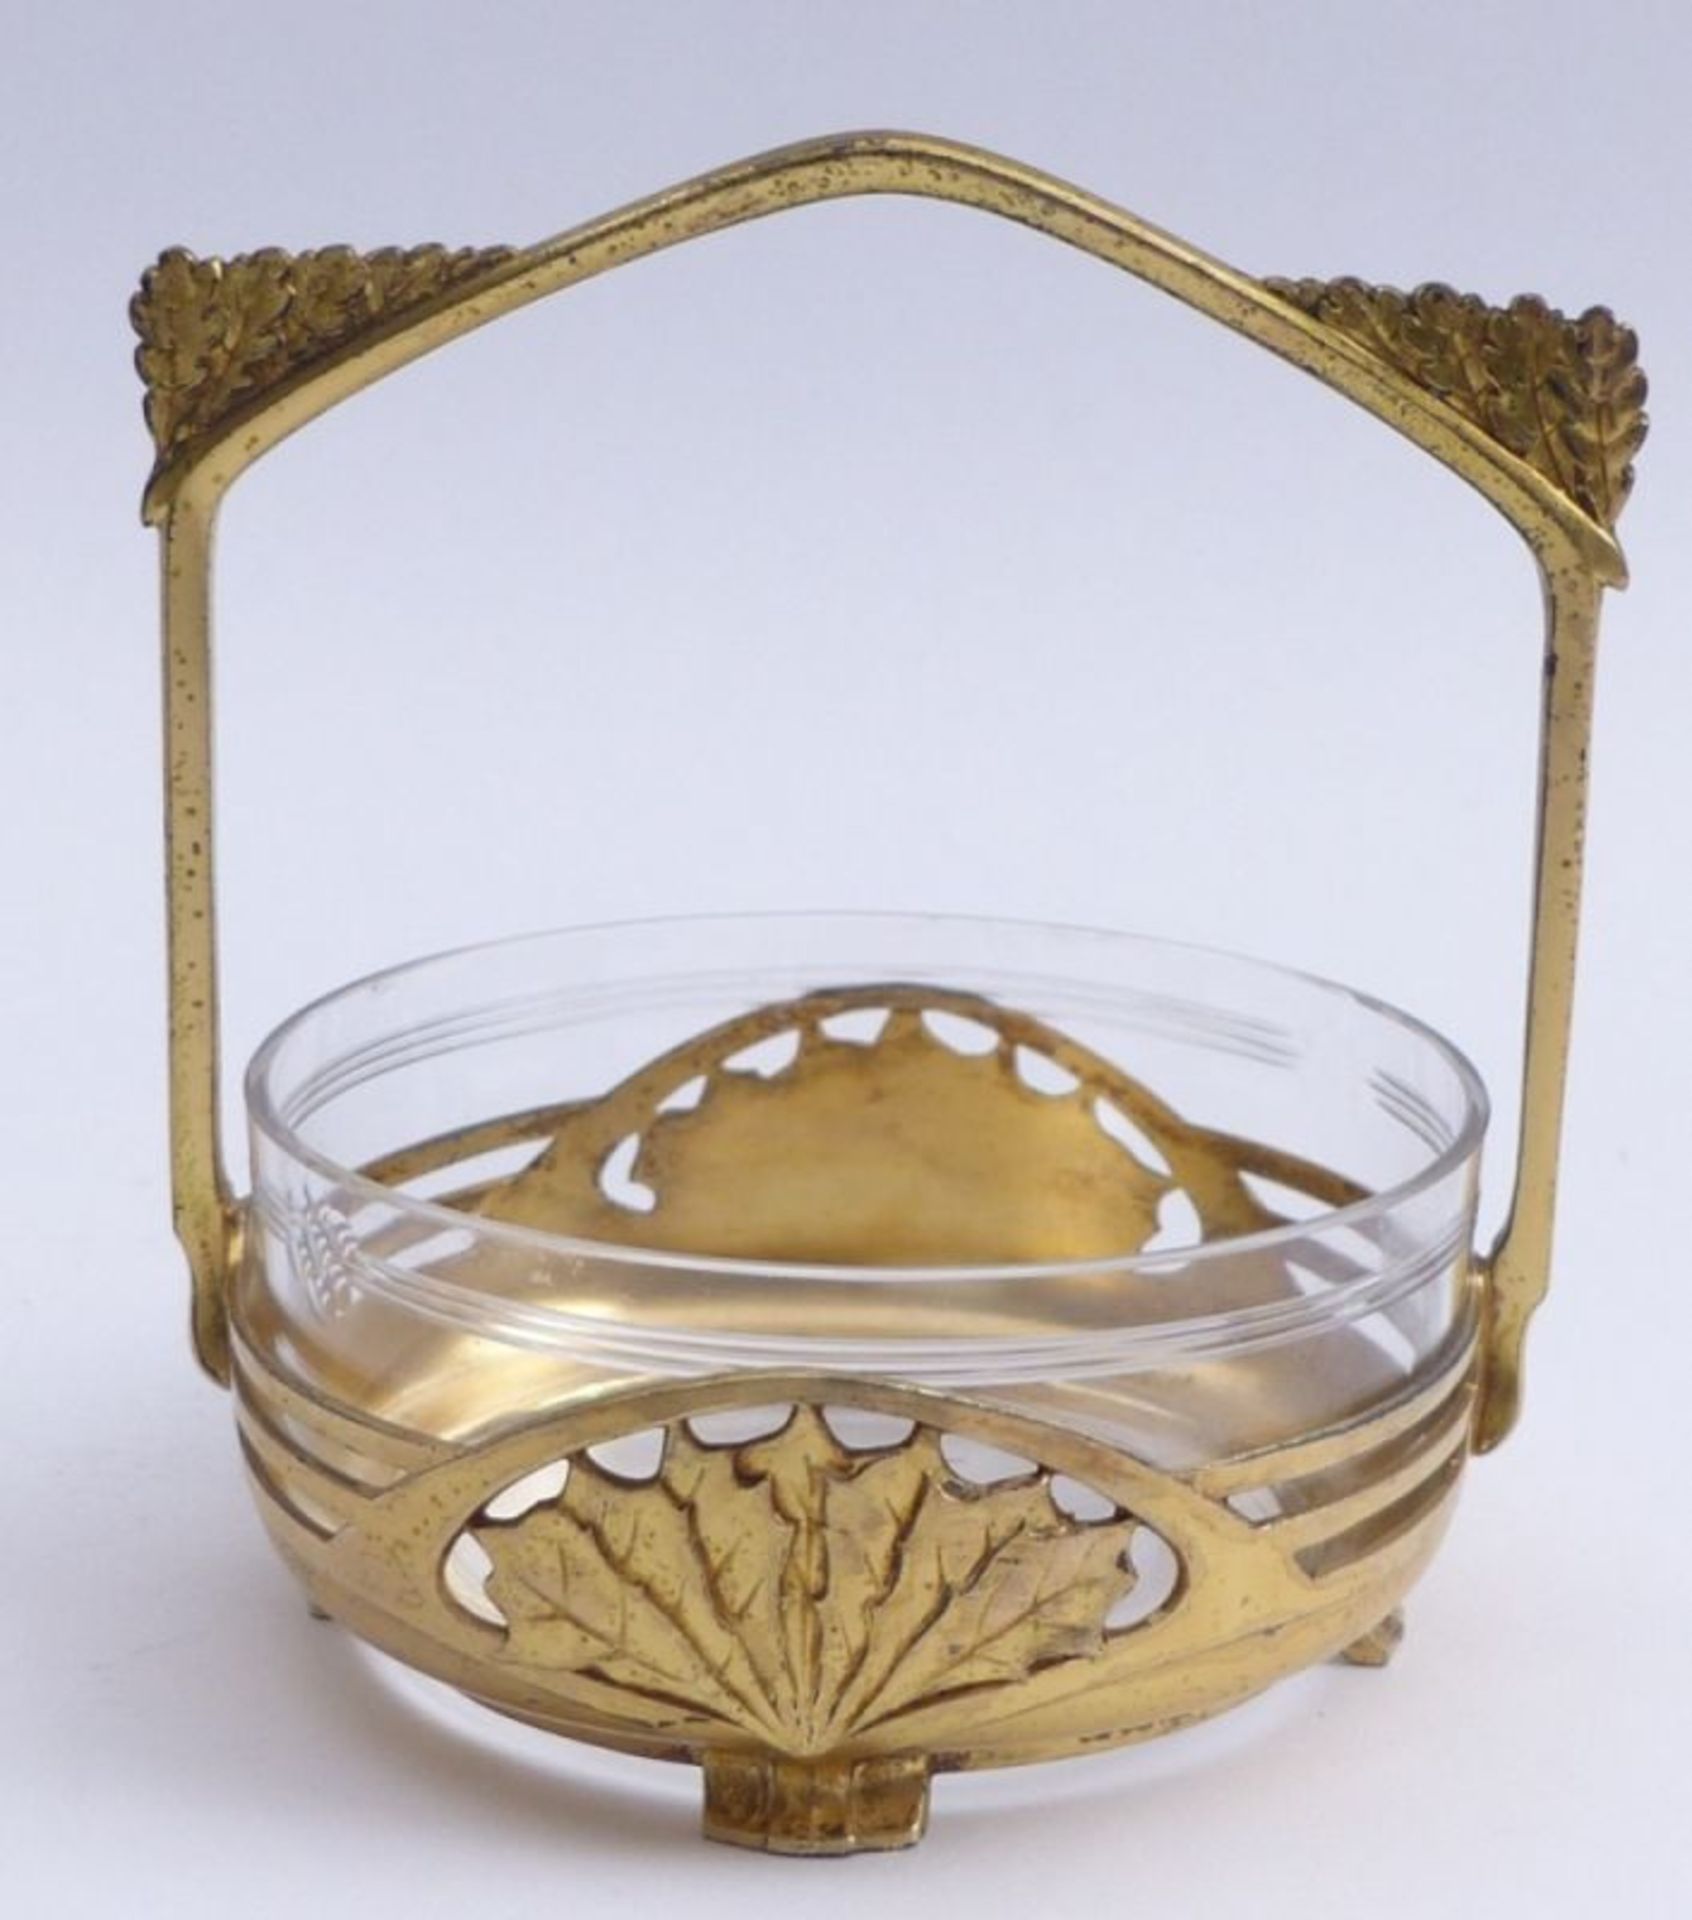 Confectionery bowl in mountGermany, around 1910/20Flat glass bowl with cut decoration in basket- - Bild 2 aus 2